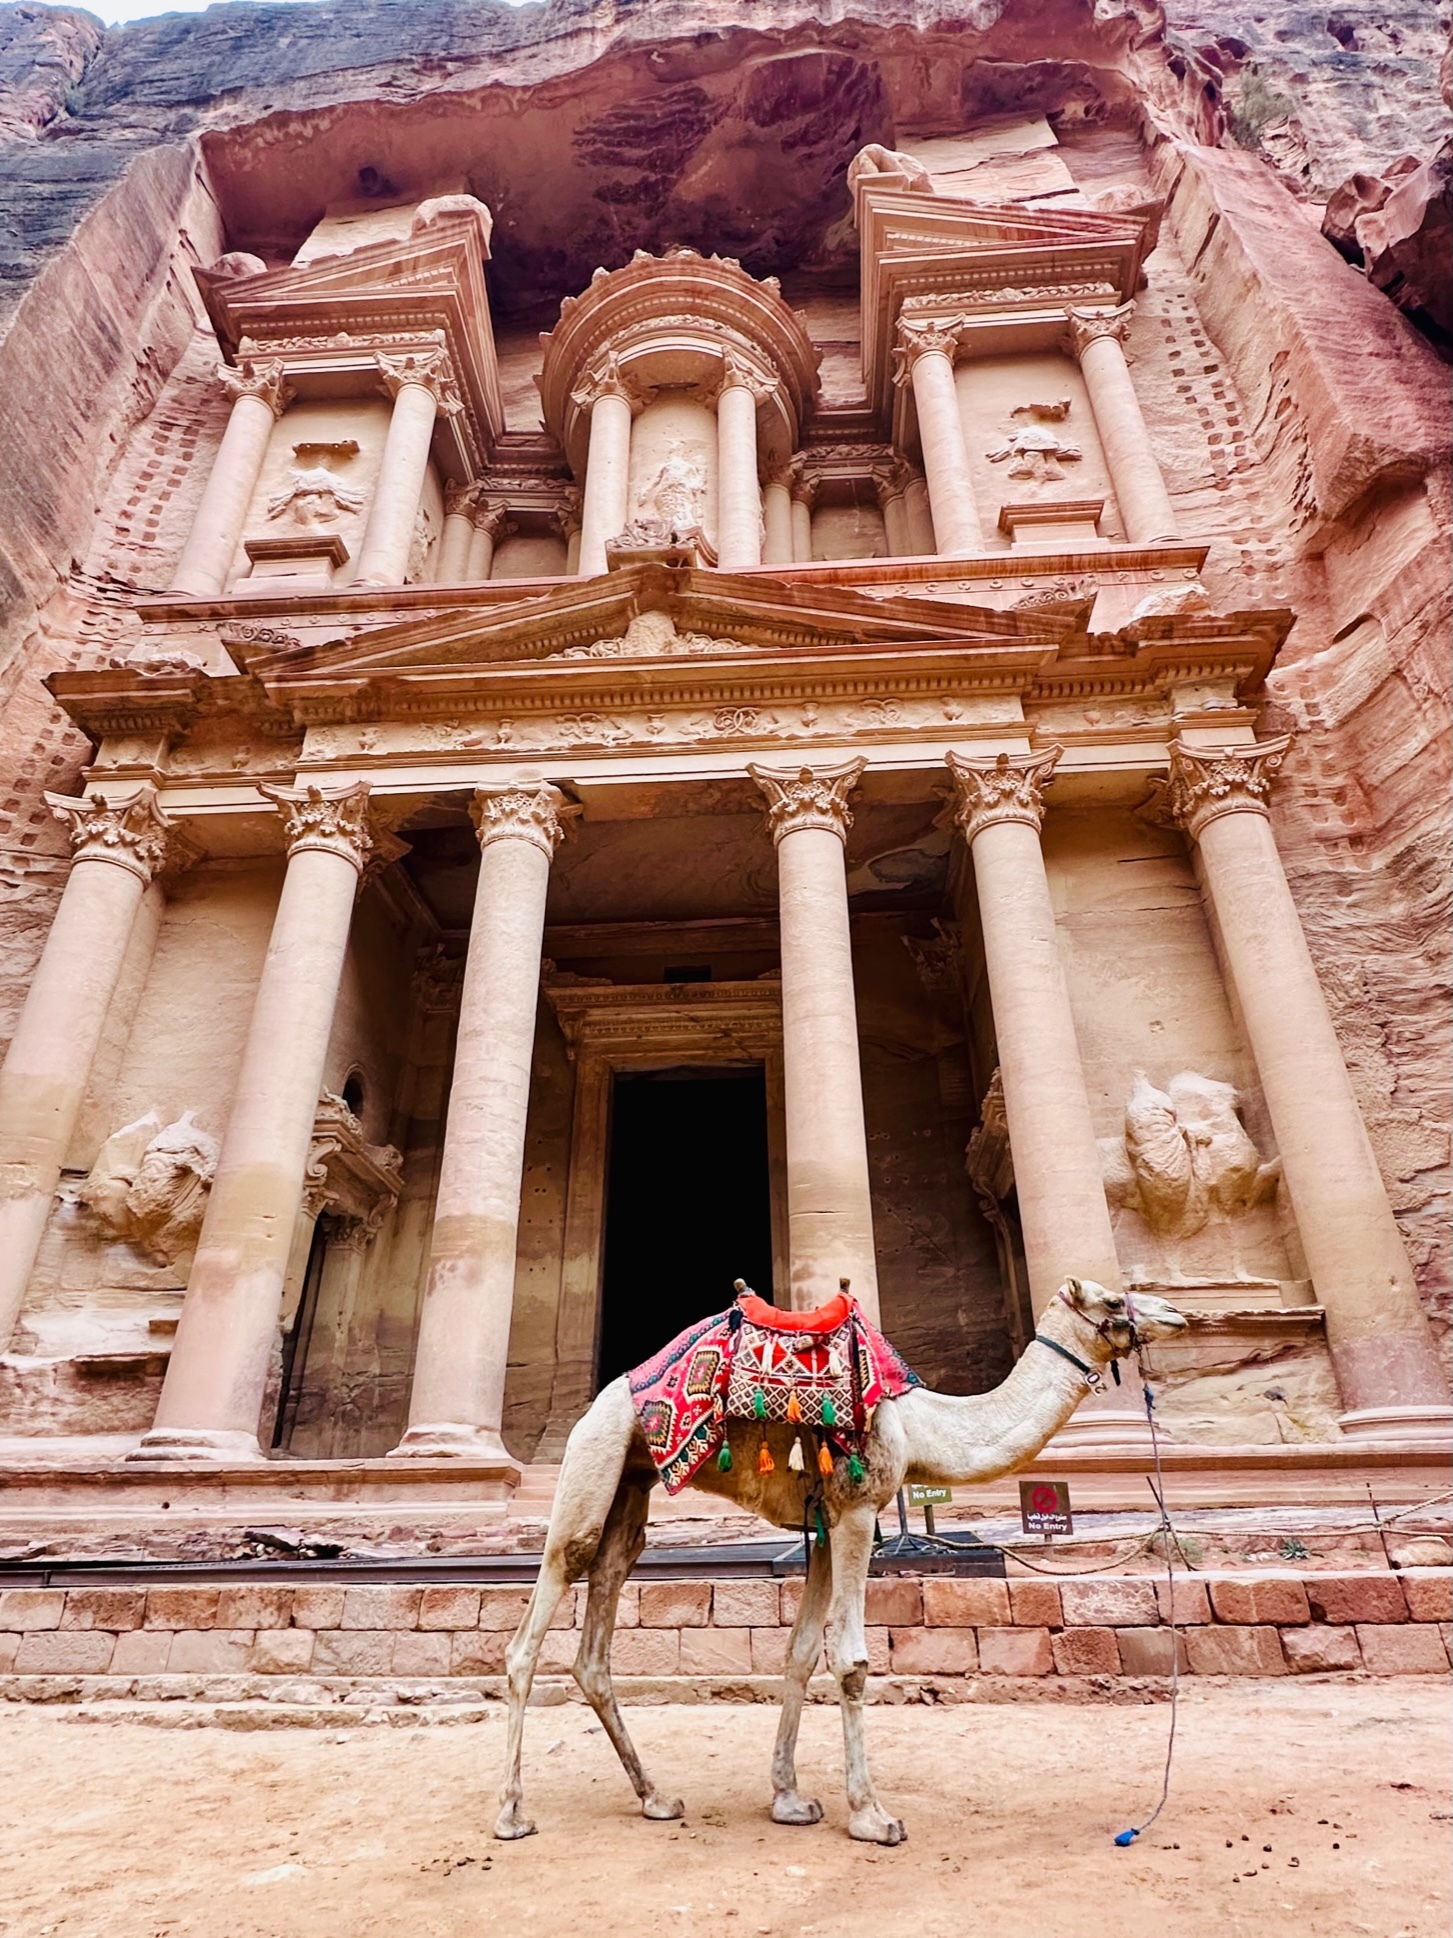 The Treasury or al-Khazneh, the jewel of the archaeological site of Petra, in Jordan.